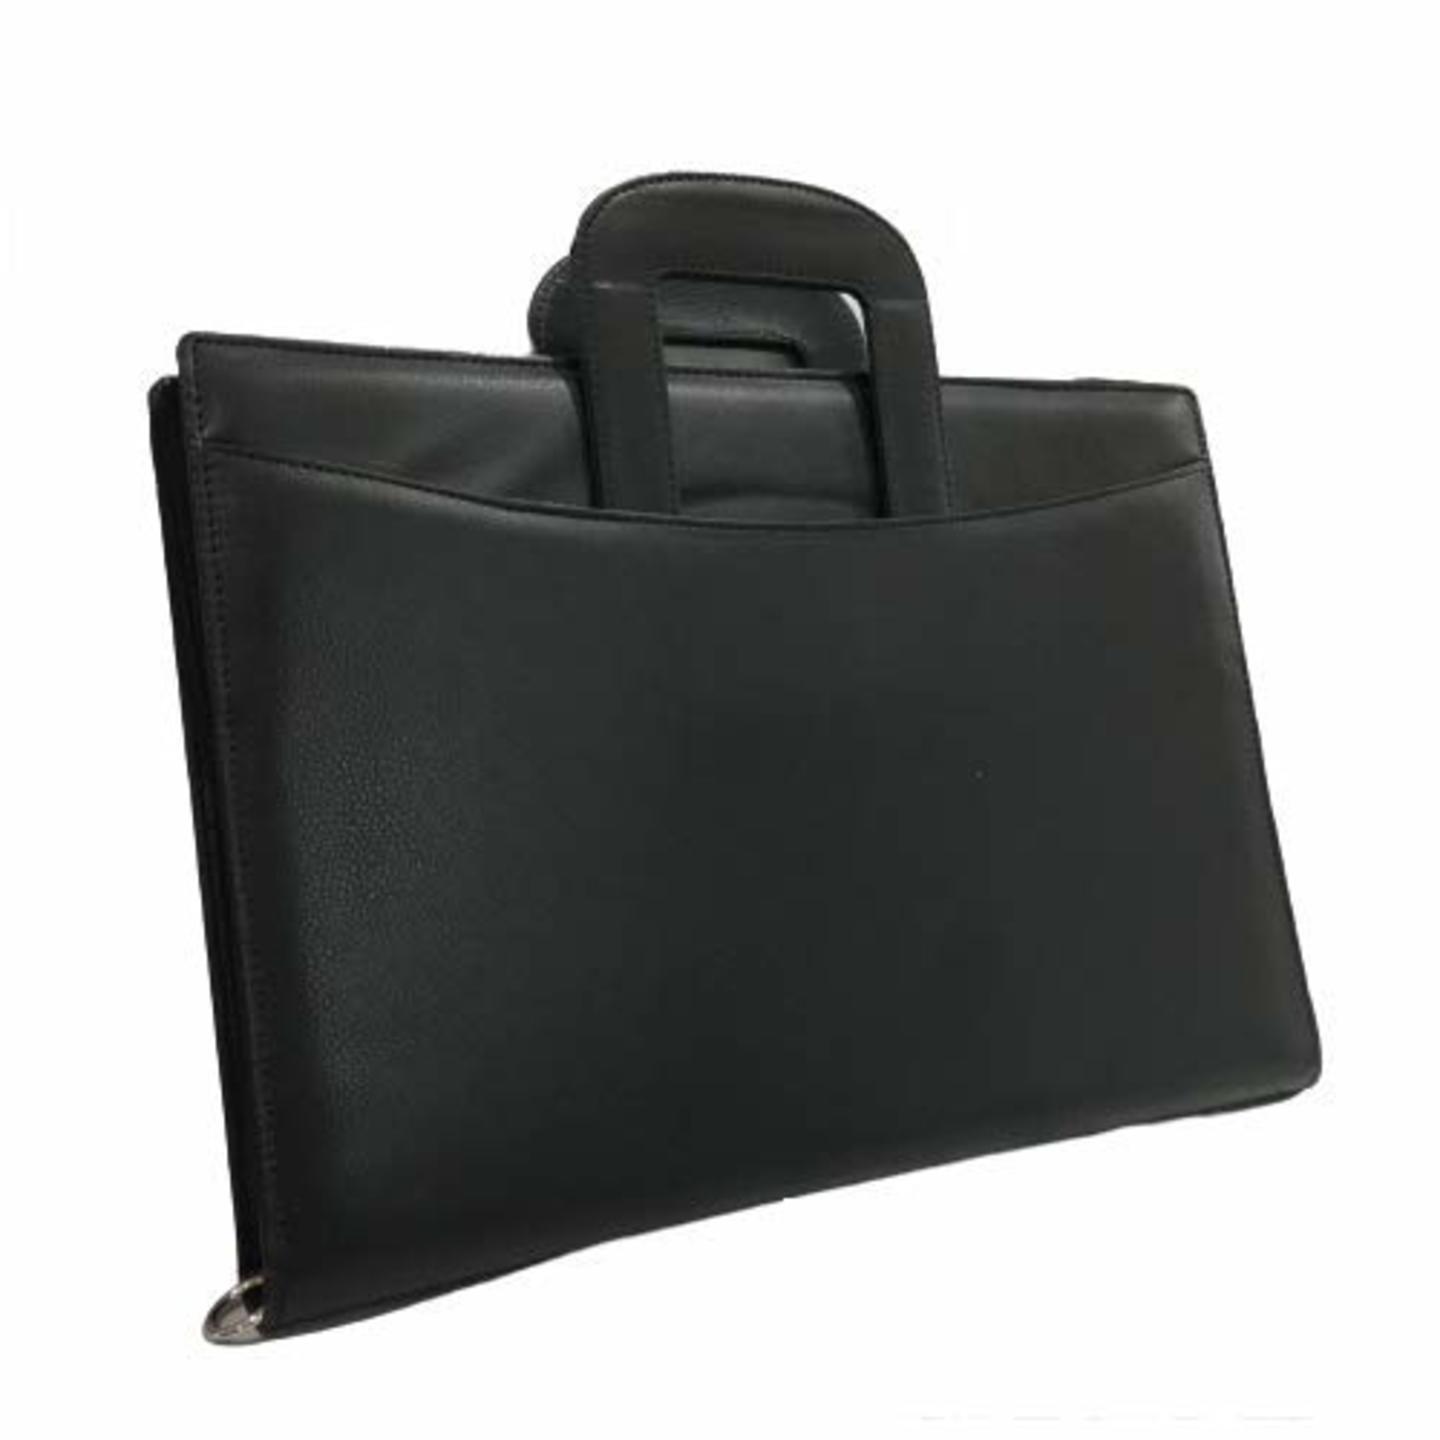 SMKT Professional File Folders with Calculator for Certificates, 2 Ring Document Bag with Adjustable Handles - Size FS Black Premium Quality Faux Leather